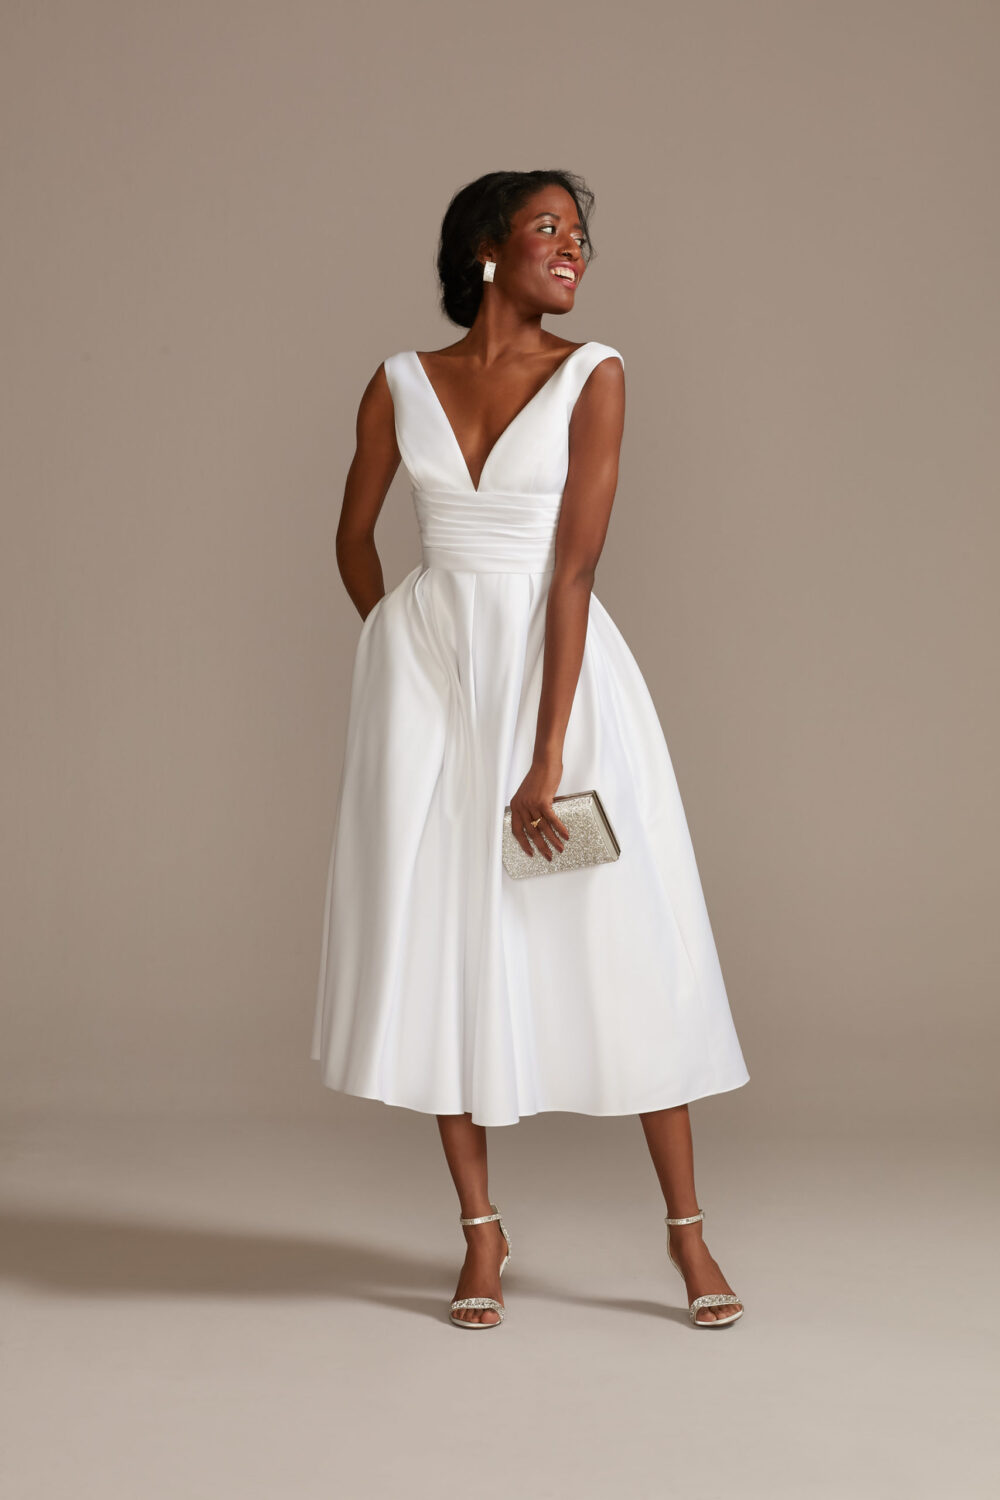 classic dresses for engagement party